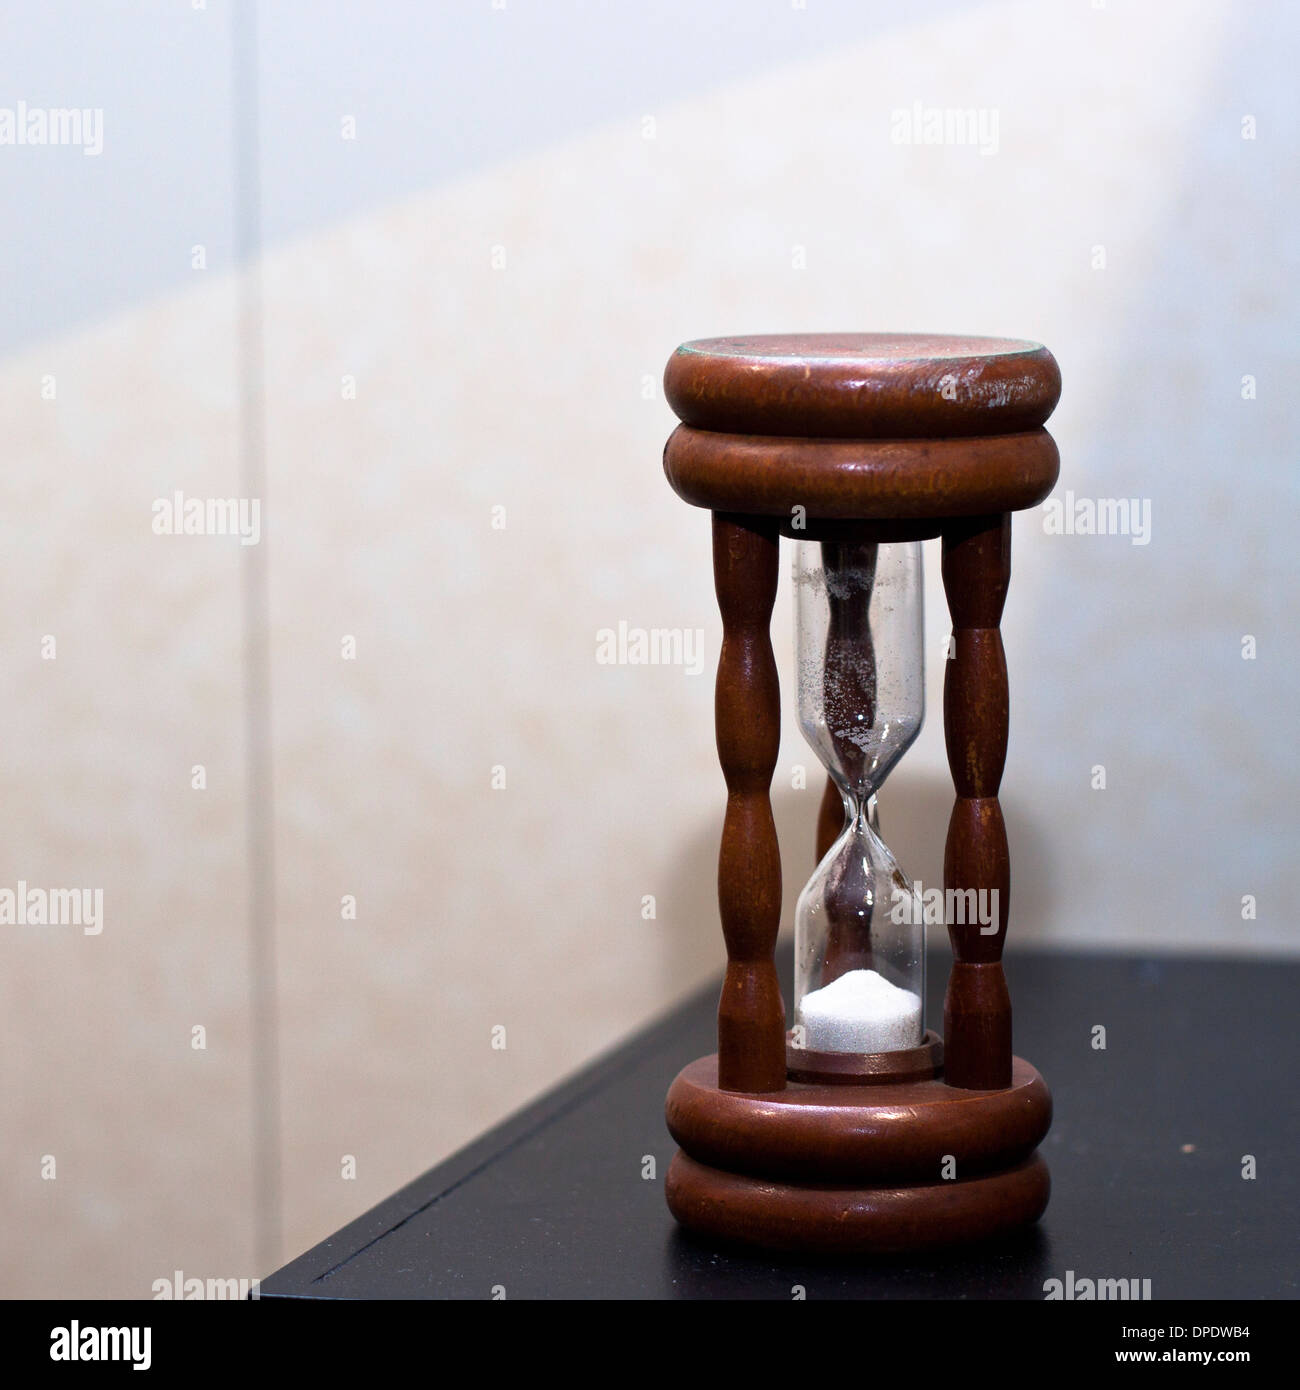 Brown wooden sand clock. Stock Photo